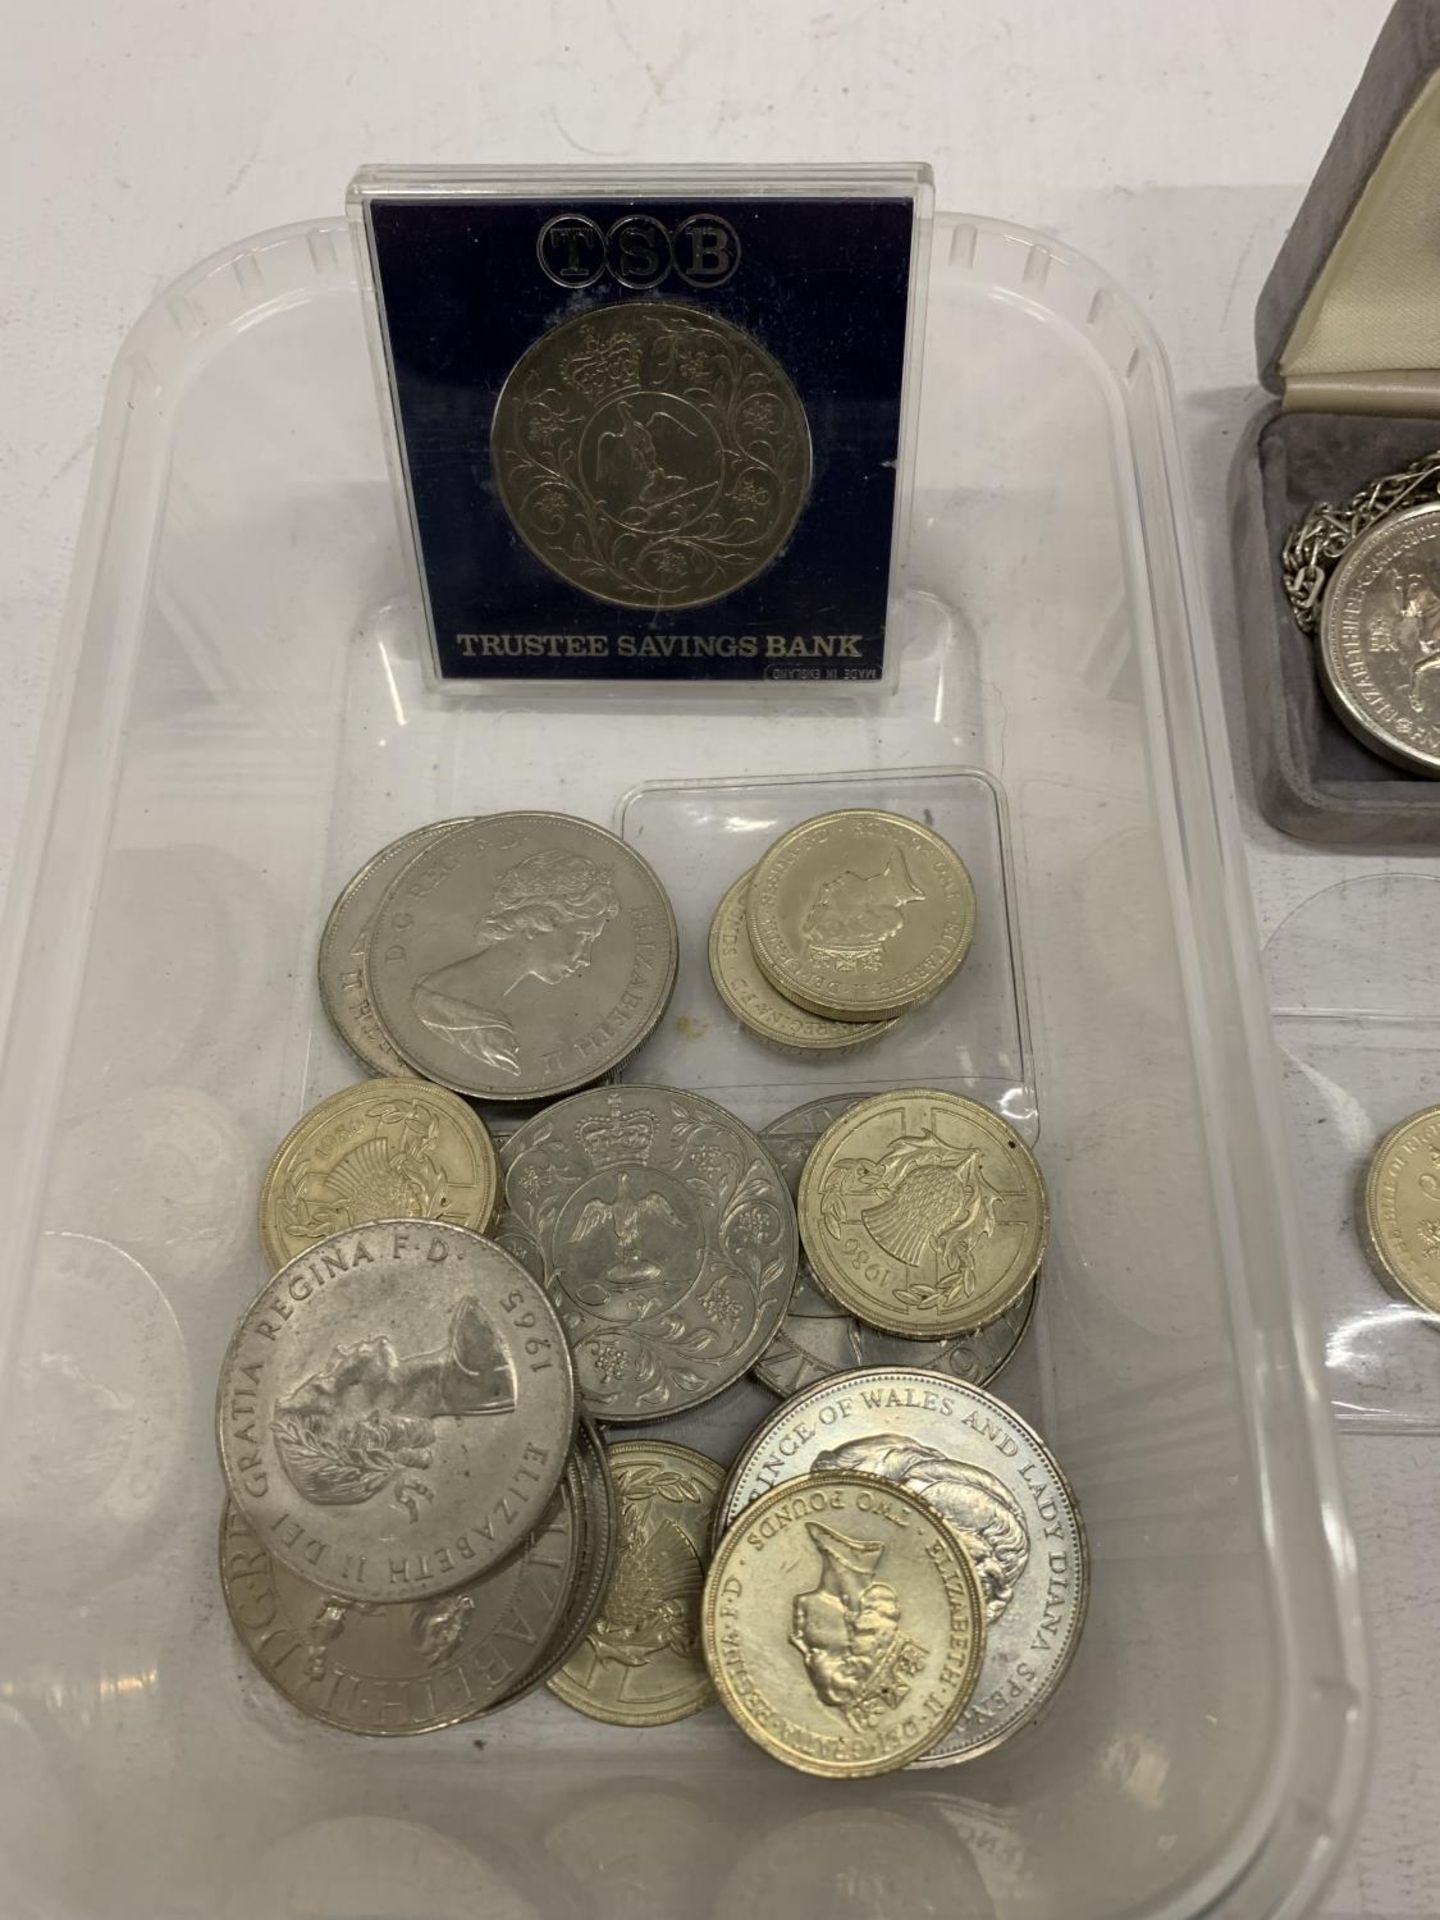 A QUANTITY OF COMMEMORATIVE CROWNS, ONE ON A CHAIN, PLUS TWO POUND COINS AND BRITAIN'S FIRST DECIMAL - Image 2 of 4